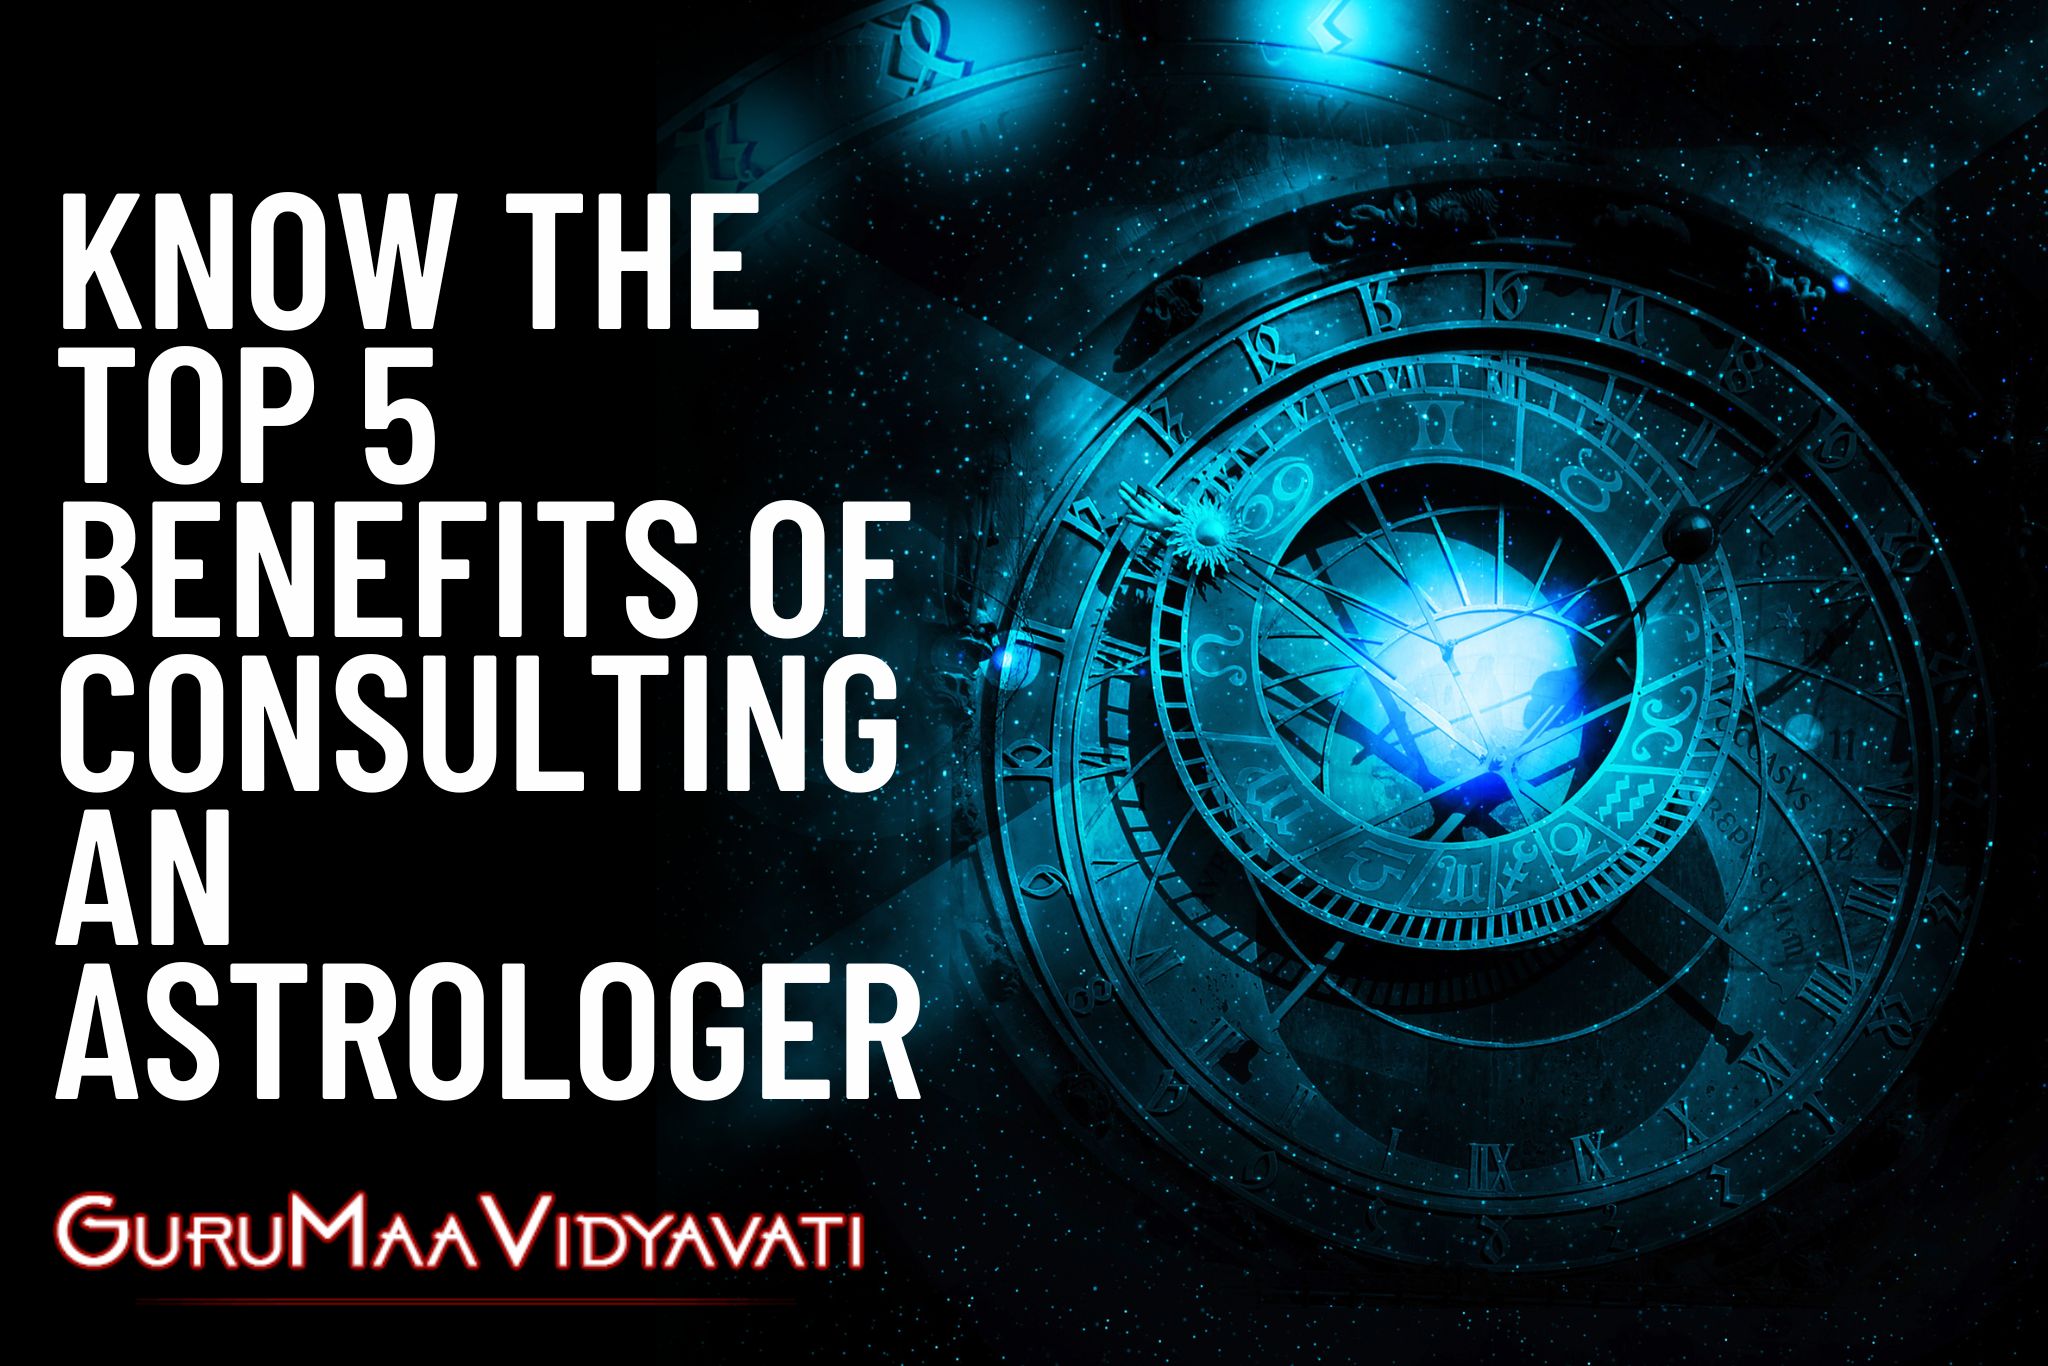 Know the Top 5 Benefits of Consulting an Astrologer